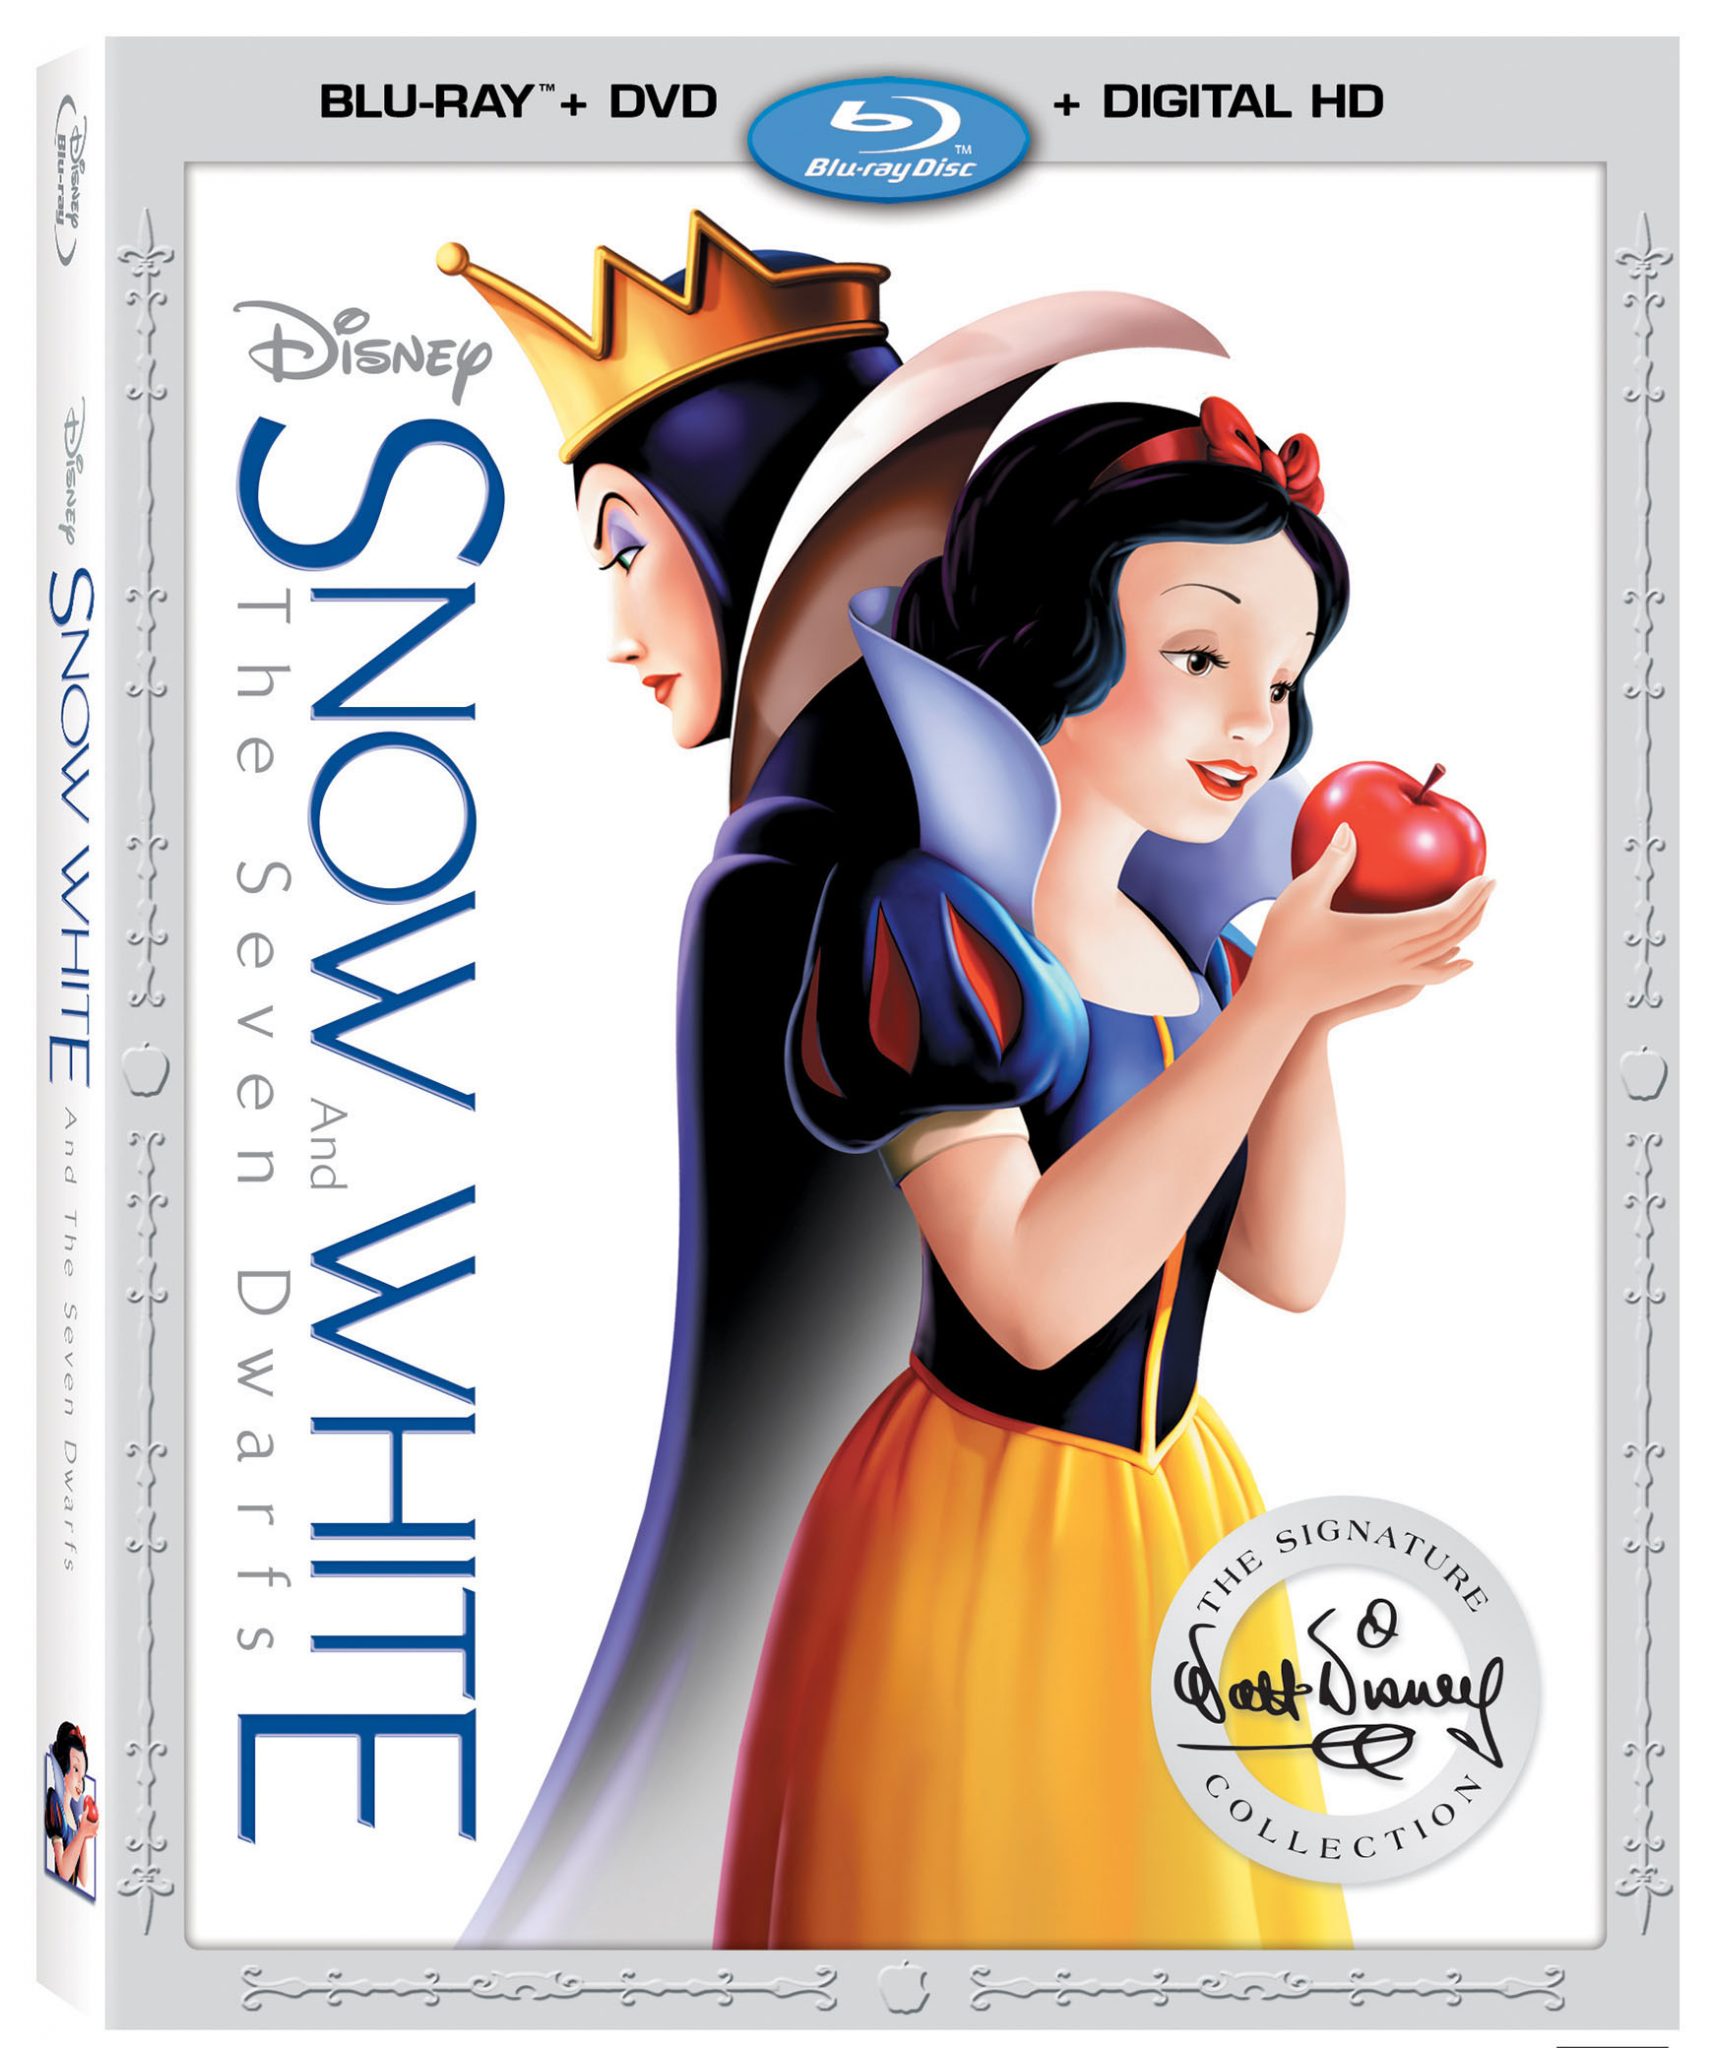 ‘Snow White And The Seven Dwarfs’ Heading to Disney Movies Anywhere 1/19